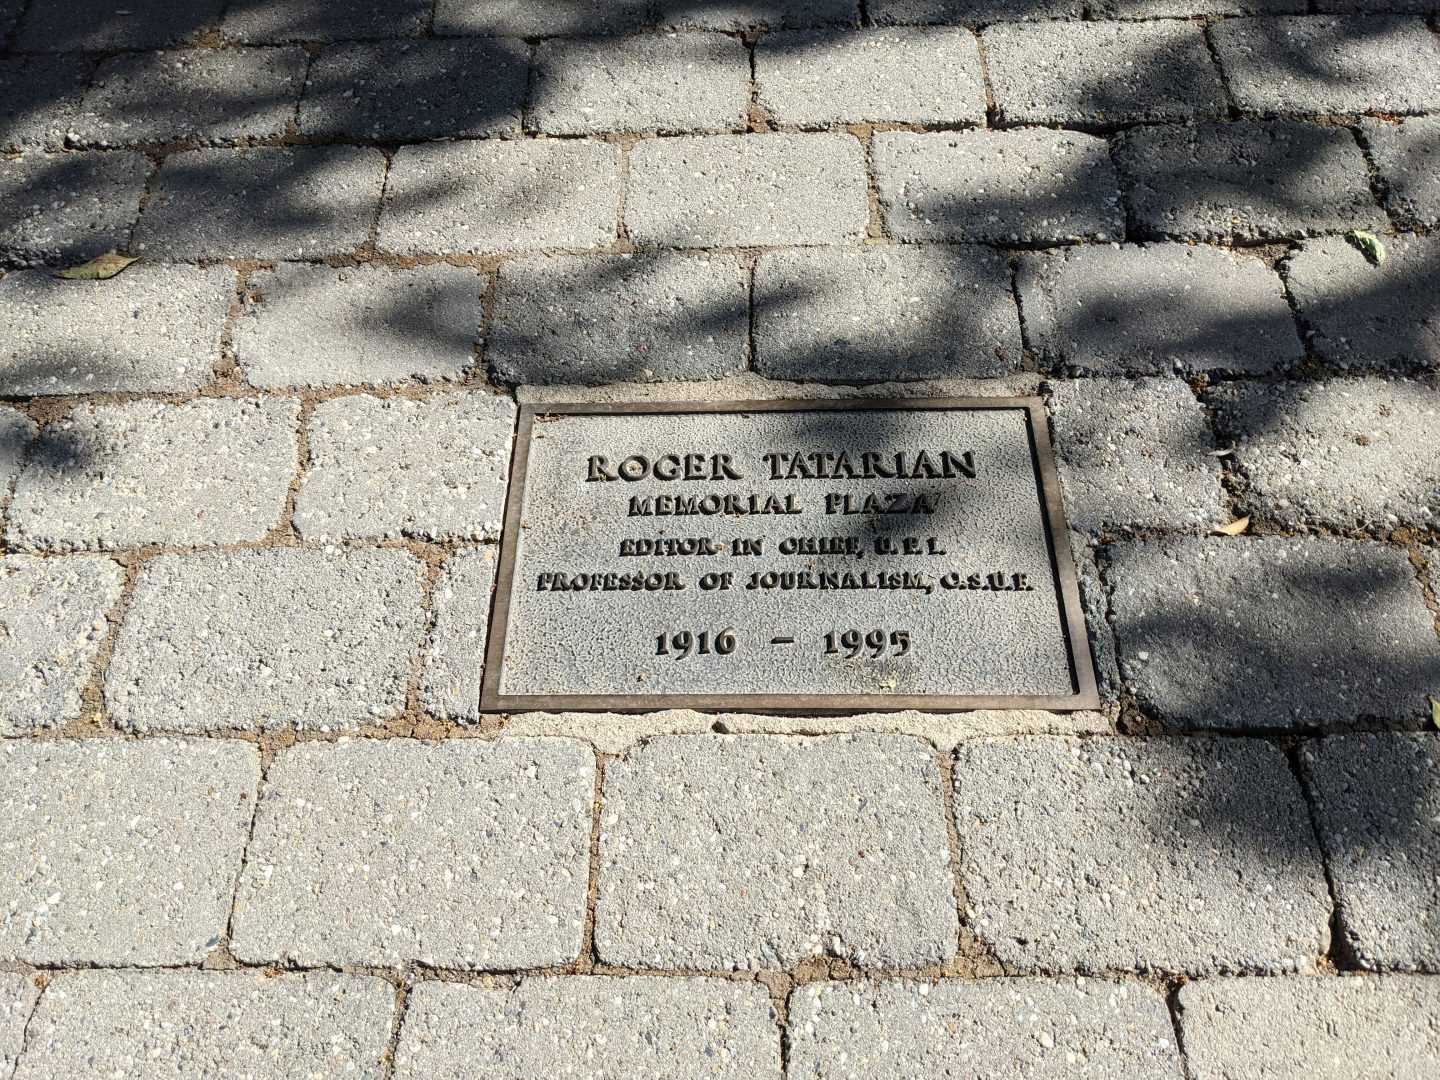 A memorial plaque is located on the ground in the Roger Tatarian Memorial Plaza at Fresno State outside of the McKee Fisk building. (Zaeem Shaikh/The Collegian)